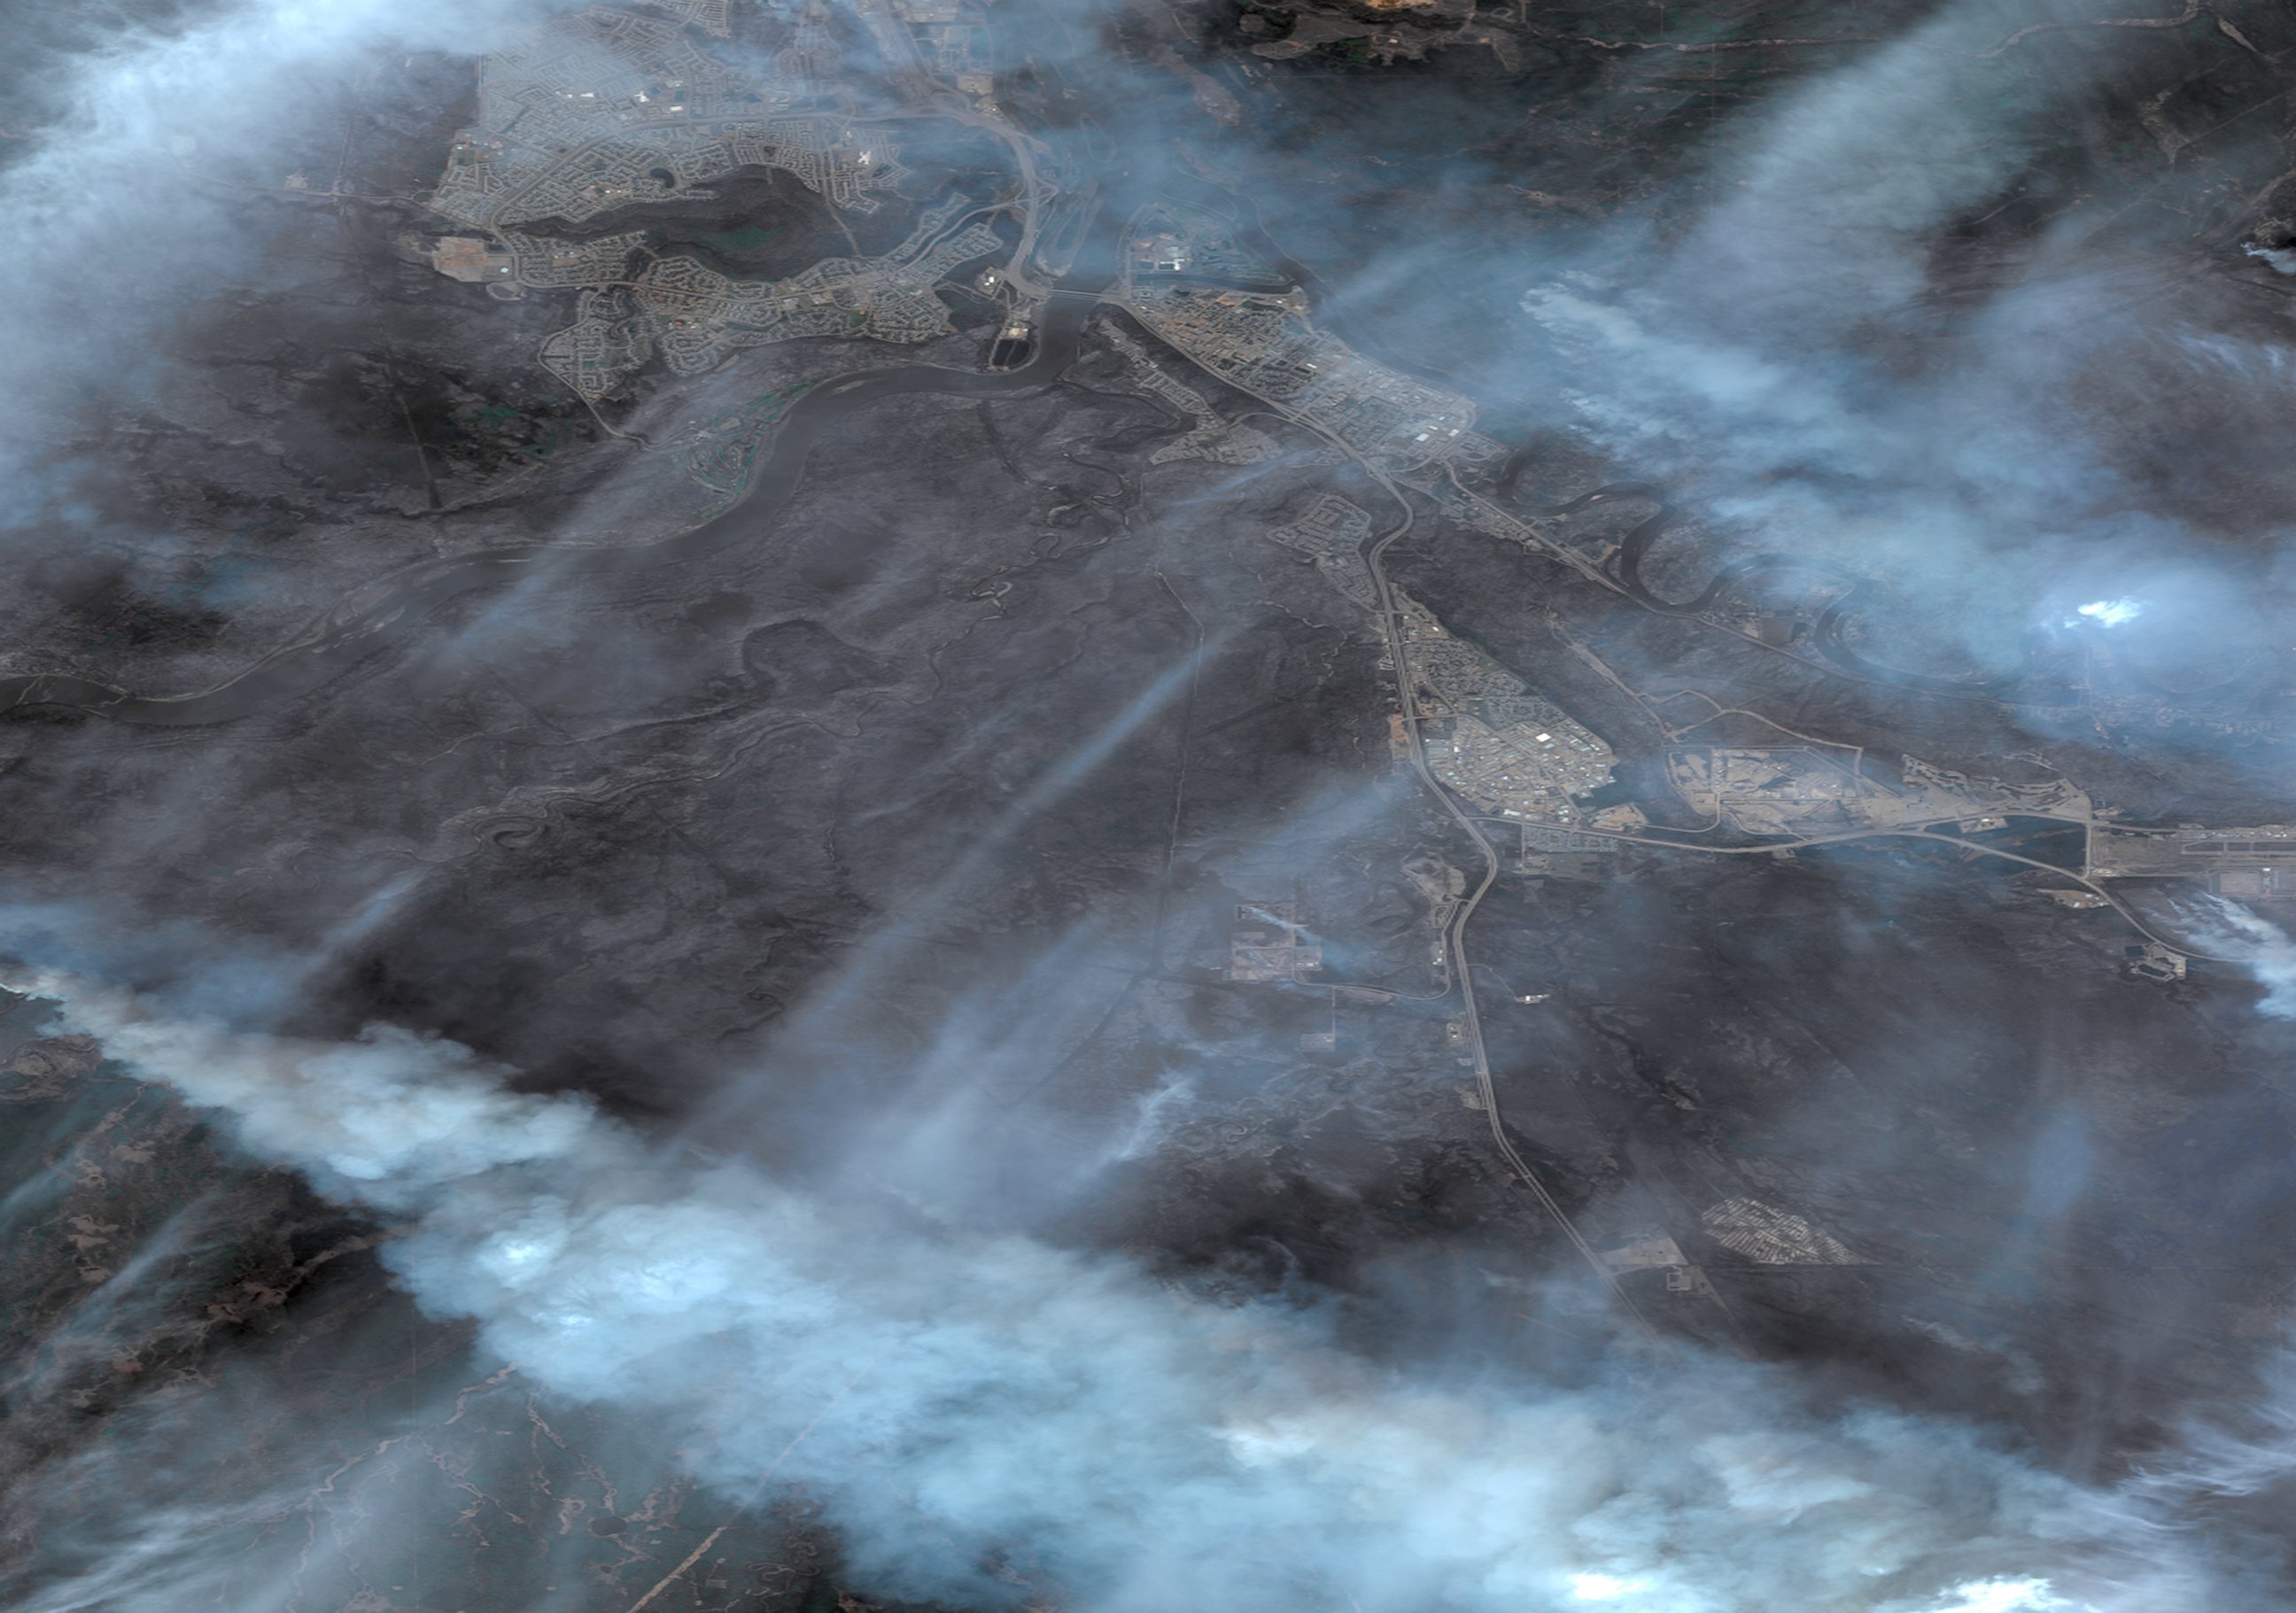 PHOTO: DigitalGlobe image of the charred Fort MacMurray area in Alberta following the wildfire that destroyed the town, May 5, 2016.  